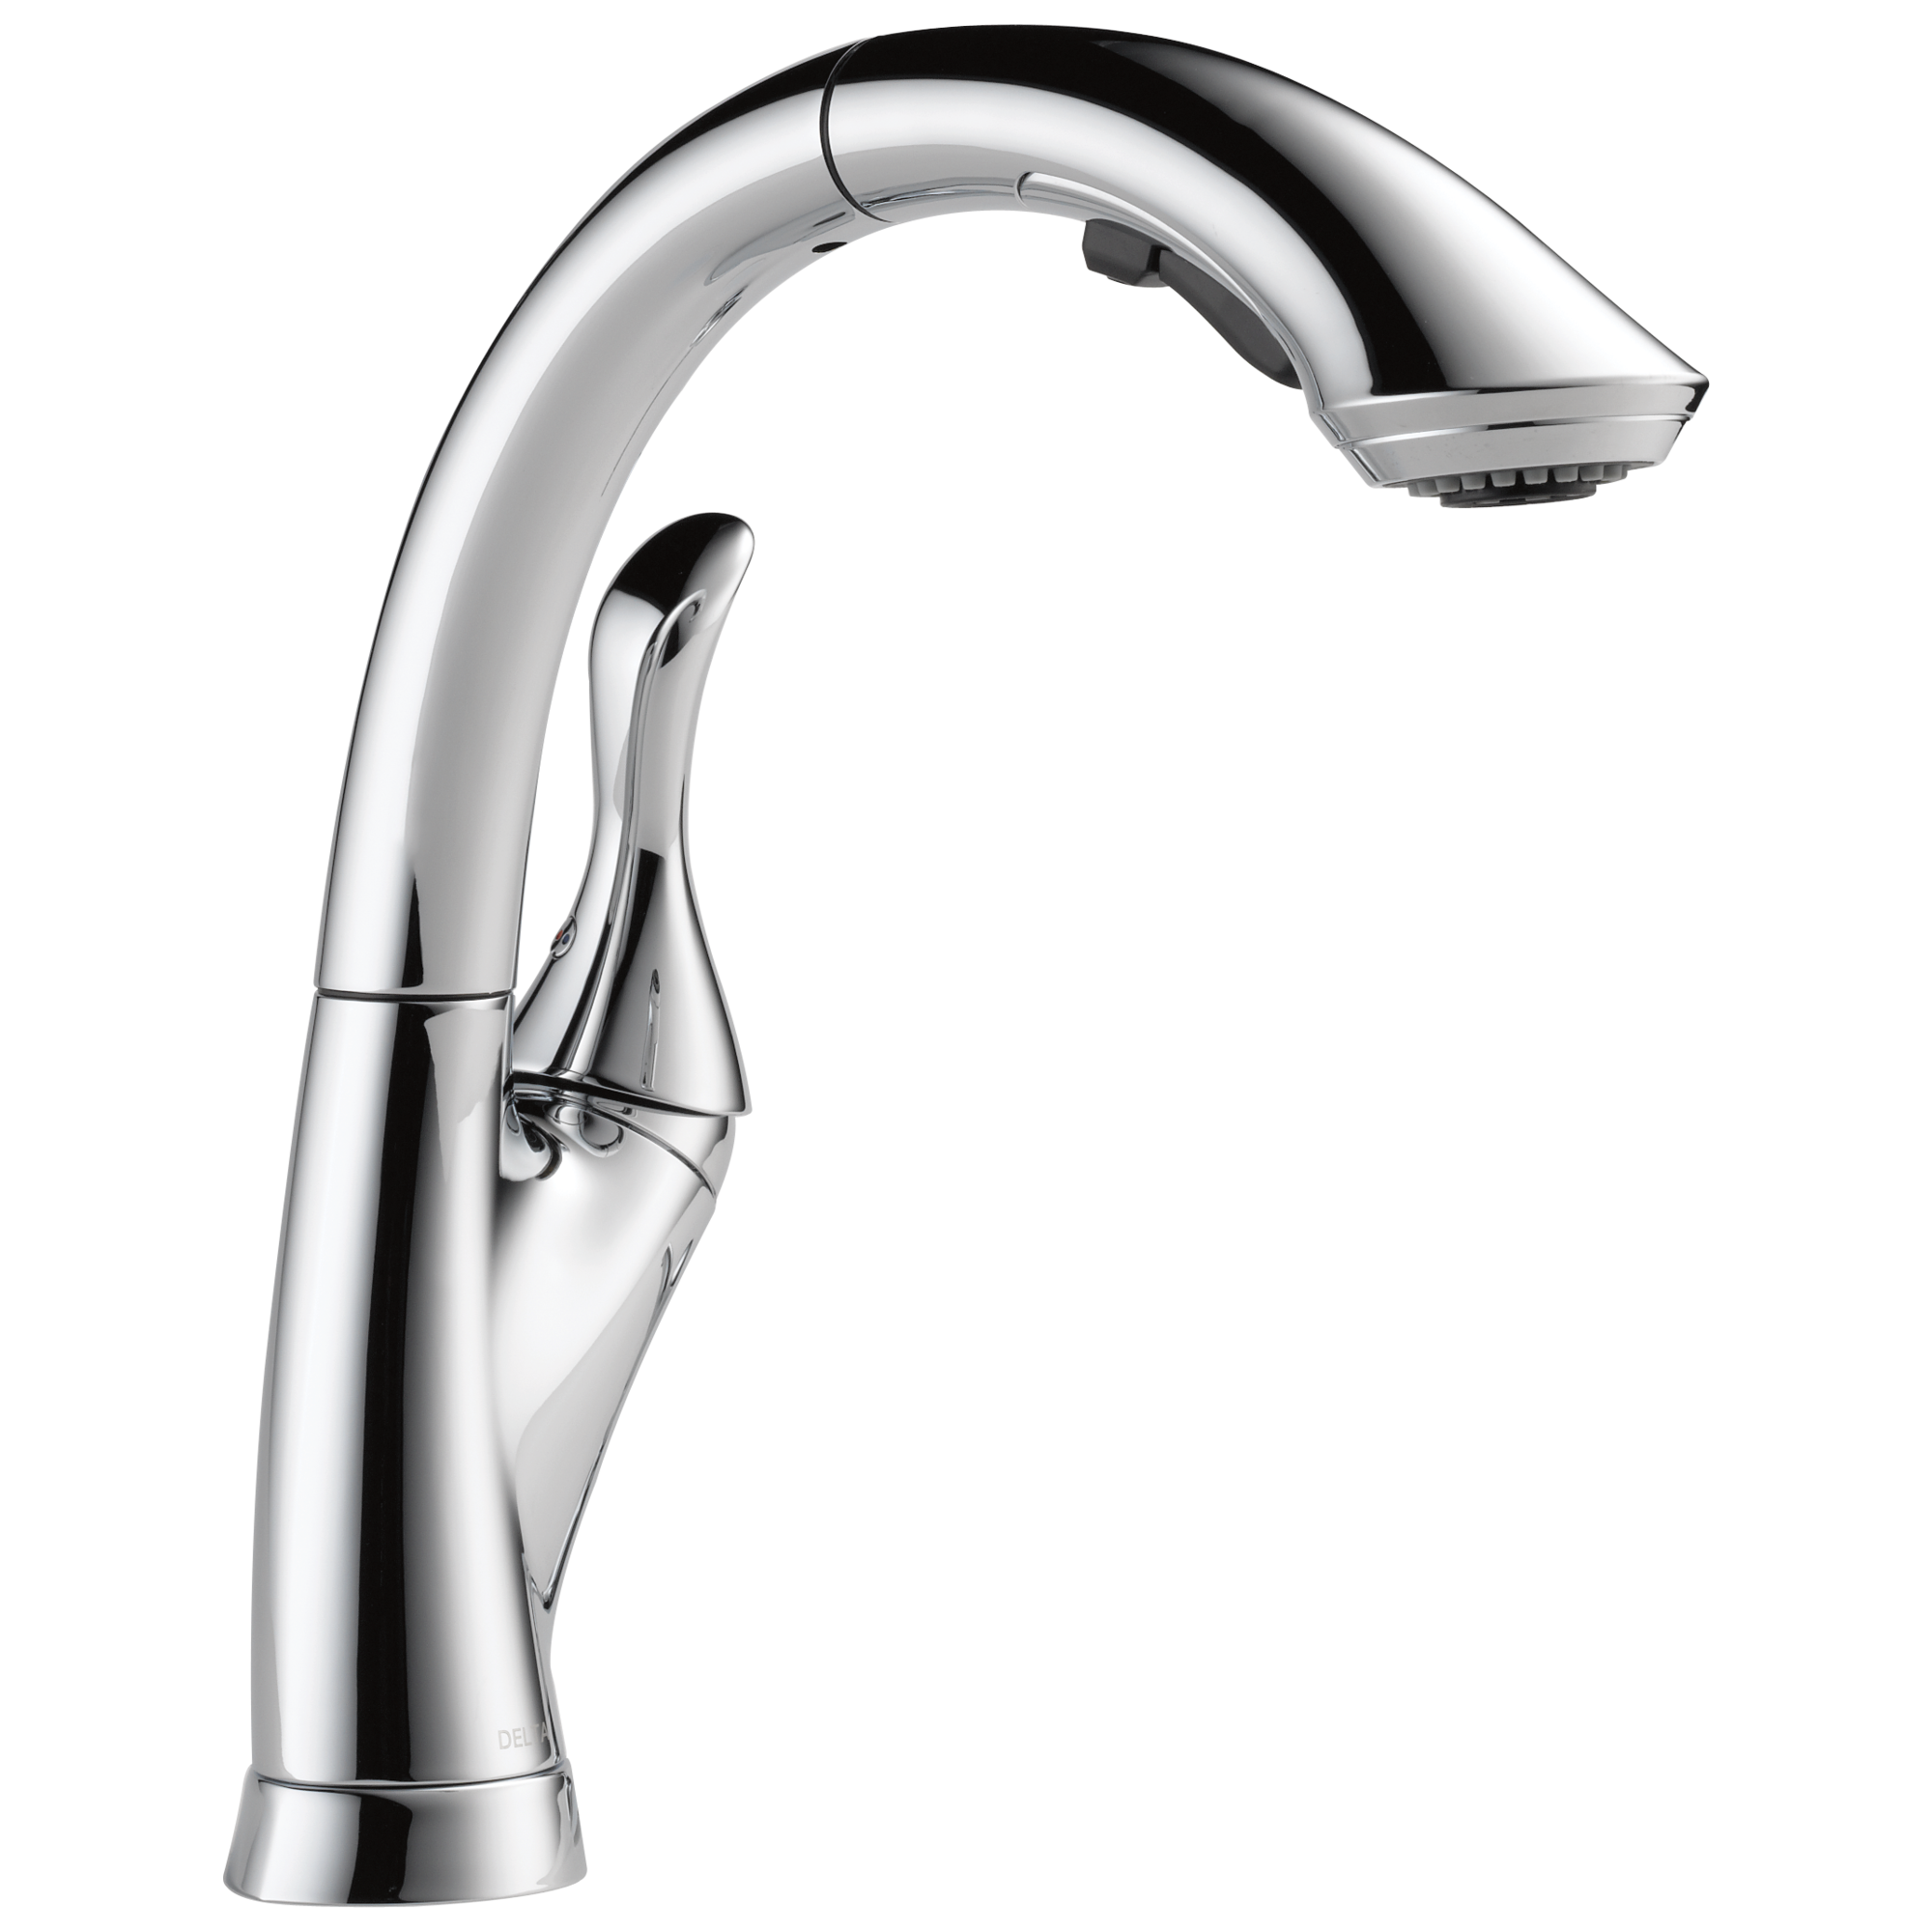 Delta Linden Single-Handle Standard Kitchen Faucet with Side Sprayer in Chrome